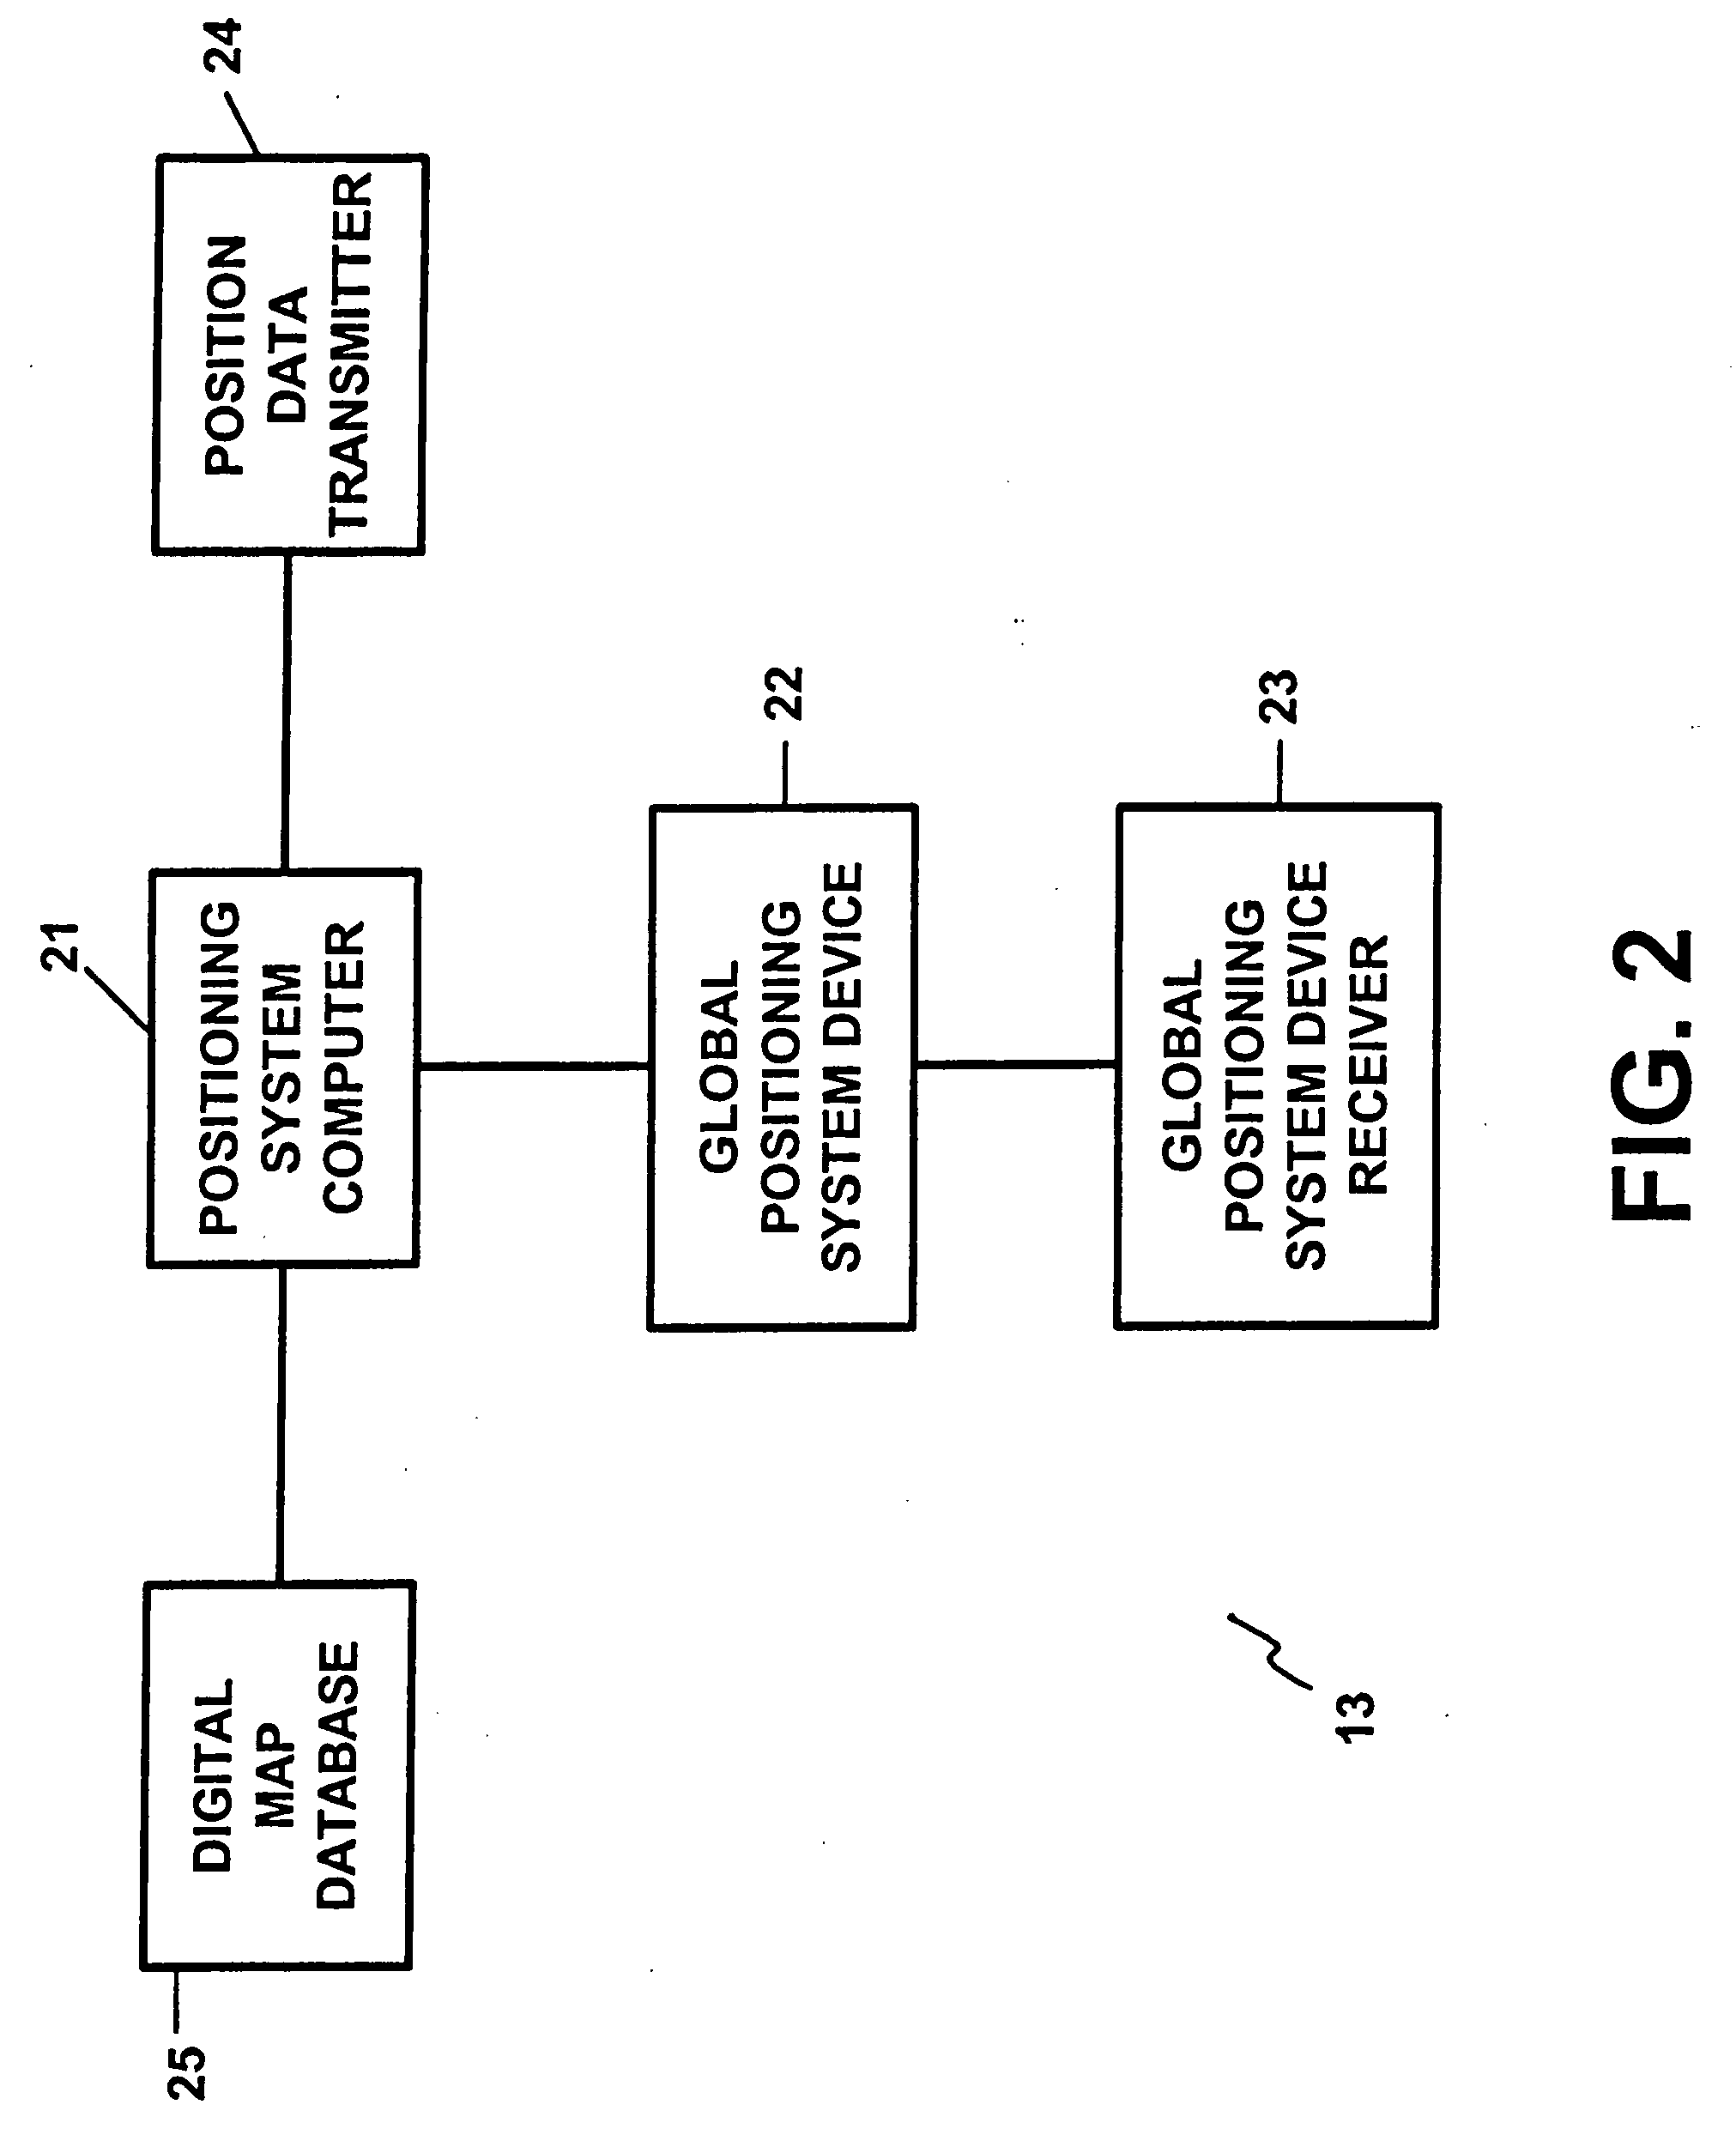 Control, monitoring, and/or security apparatus and method